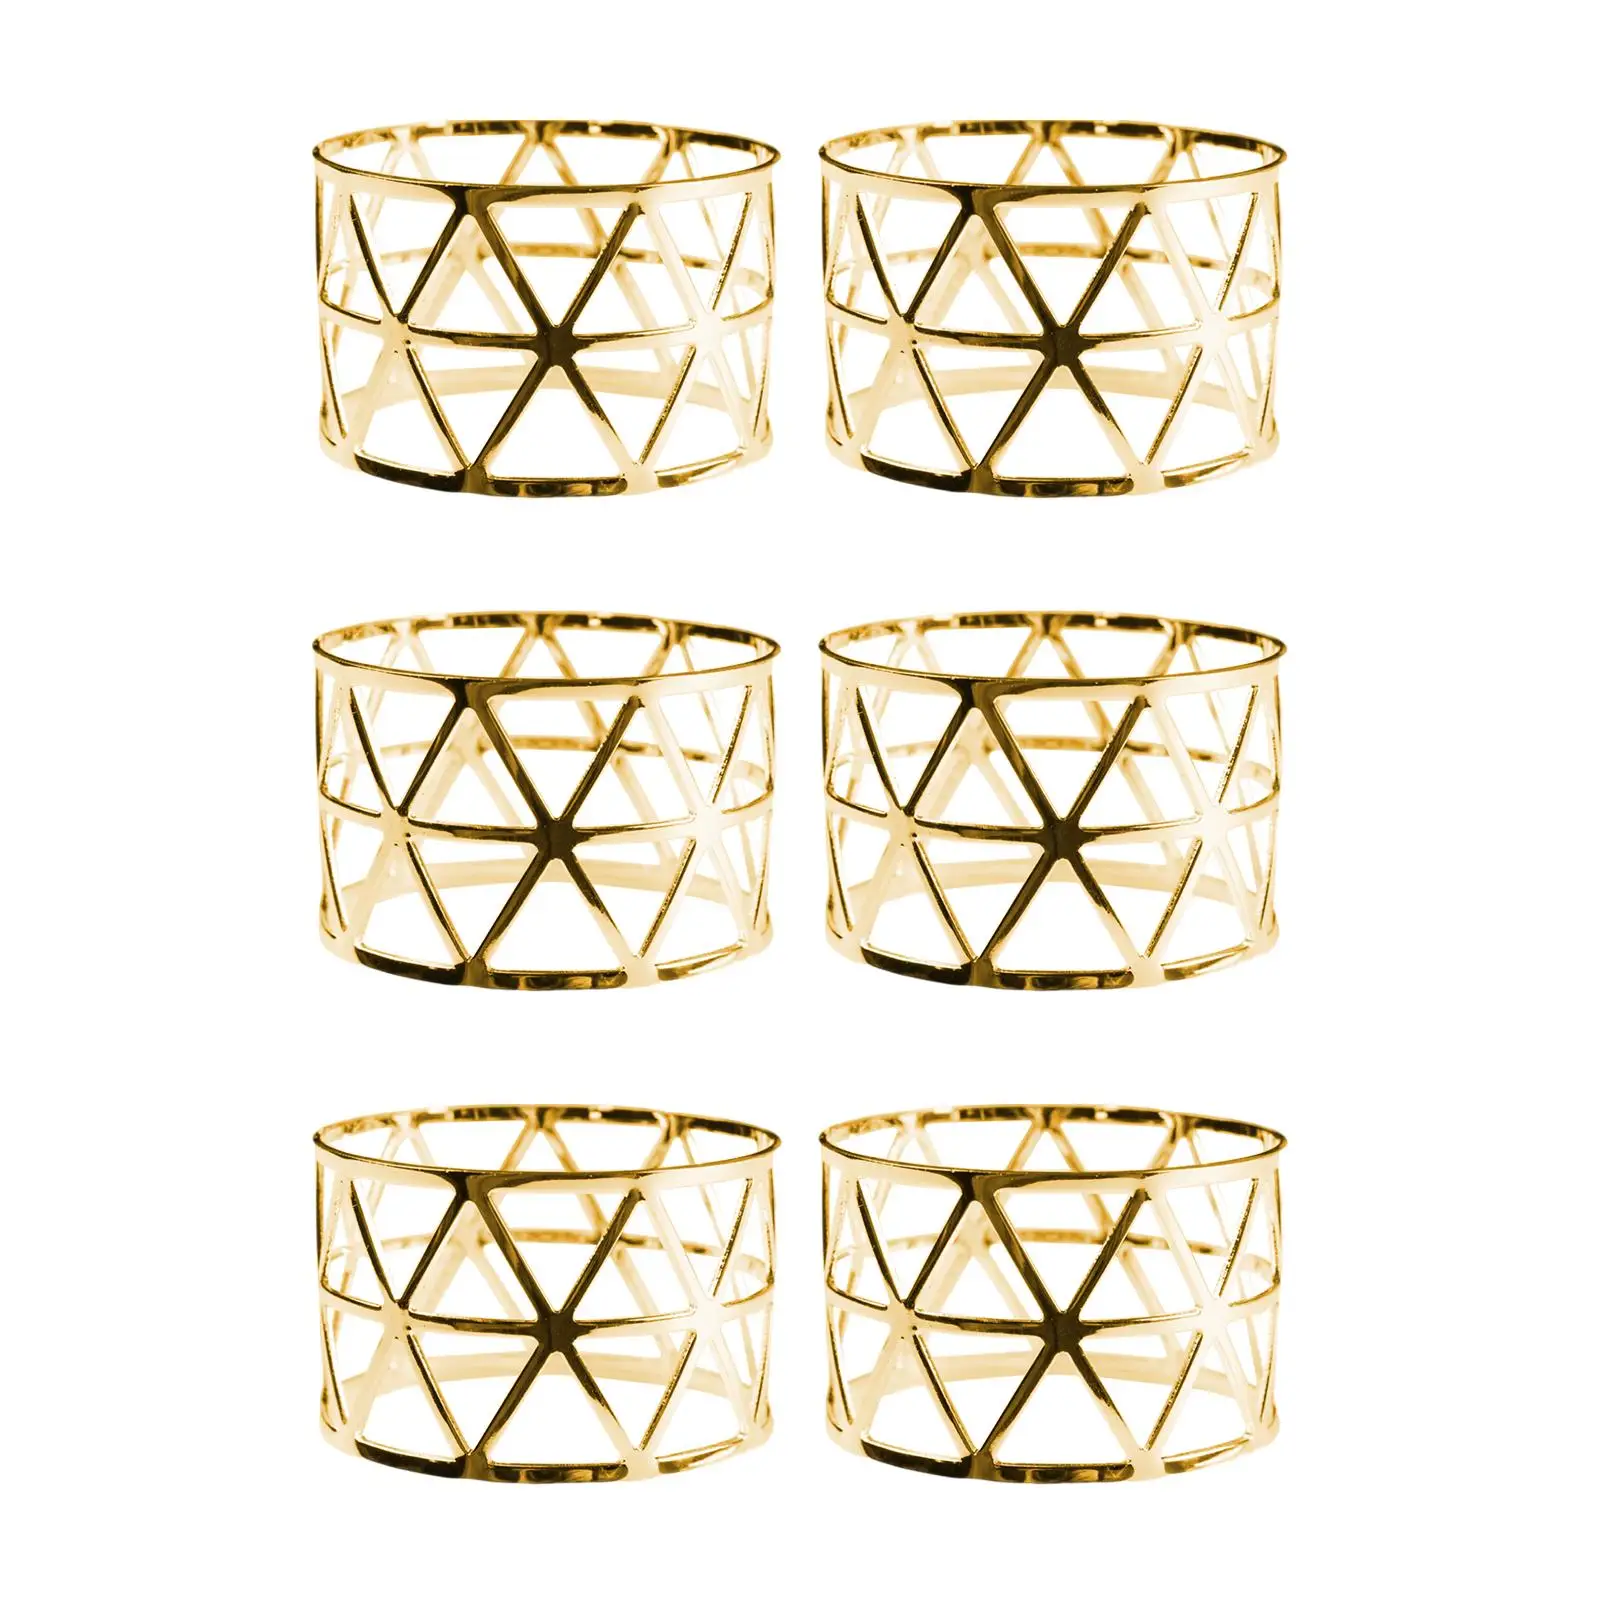 6x Crafts Napkin Holder Hollow Metal Mesh Napkin Buckles for Wedding Holiday